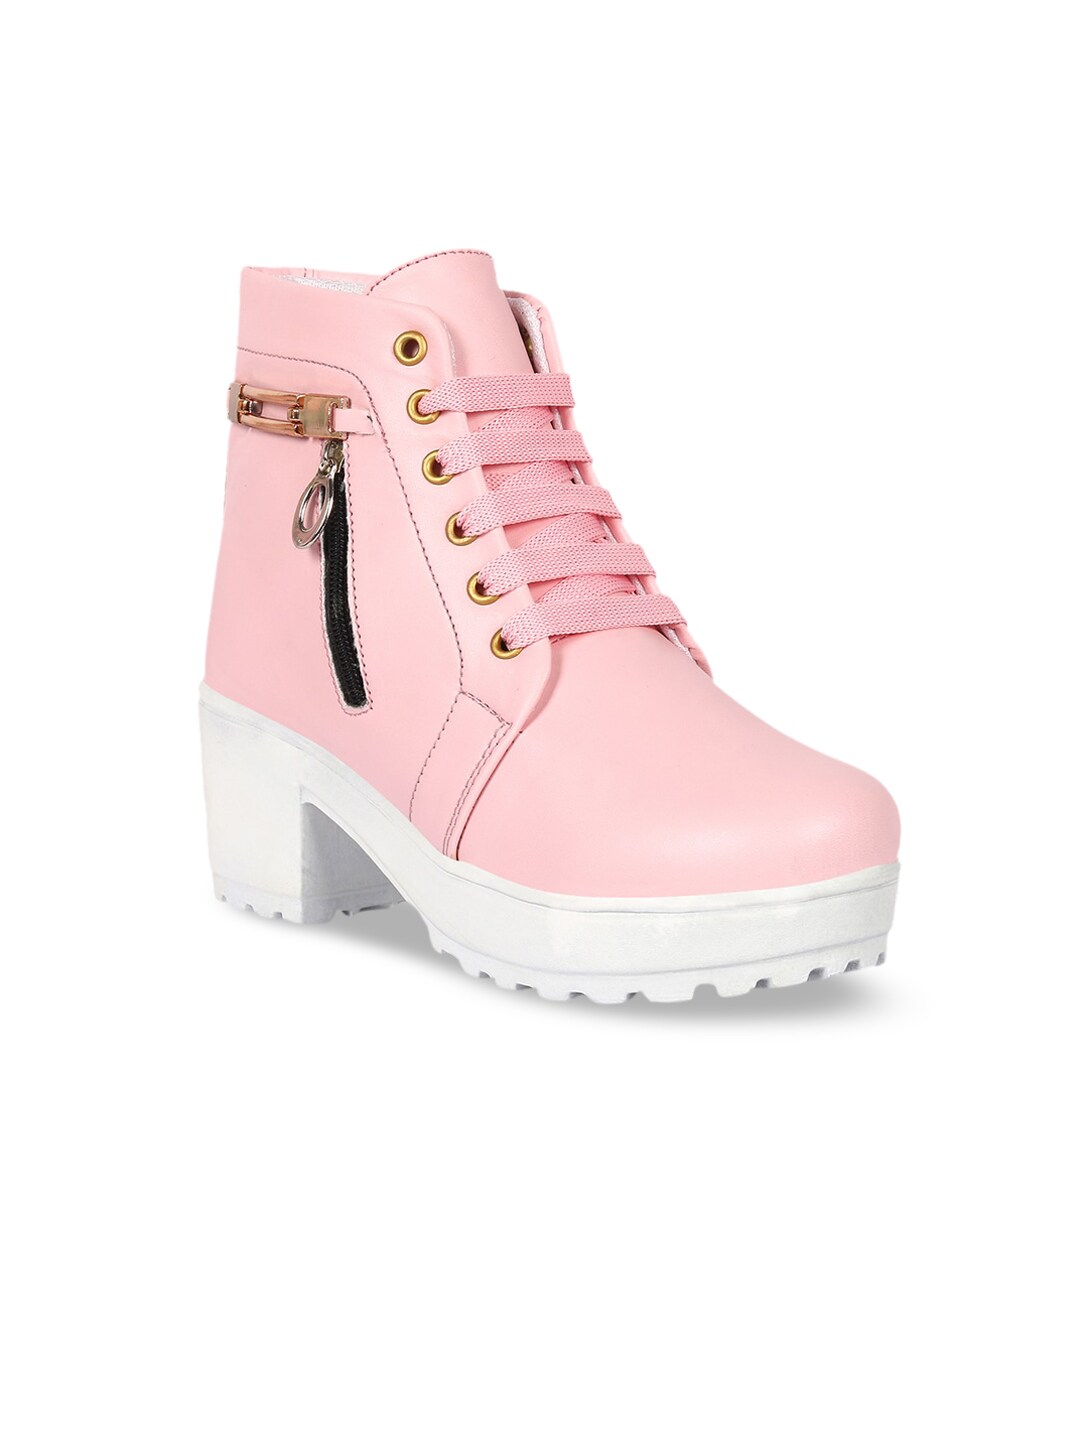 Bella Toes Women Pink Woven Design Heeled Boots Price in India